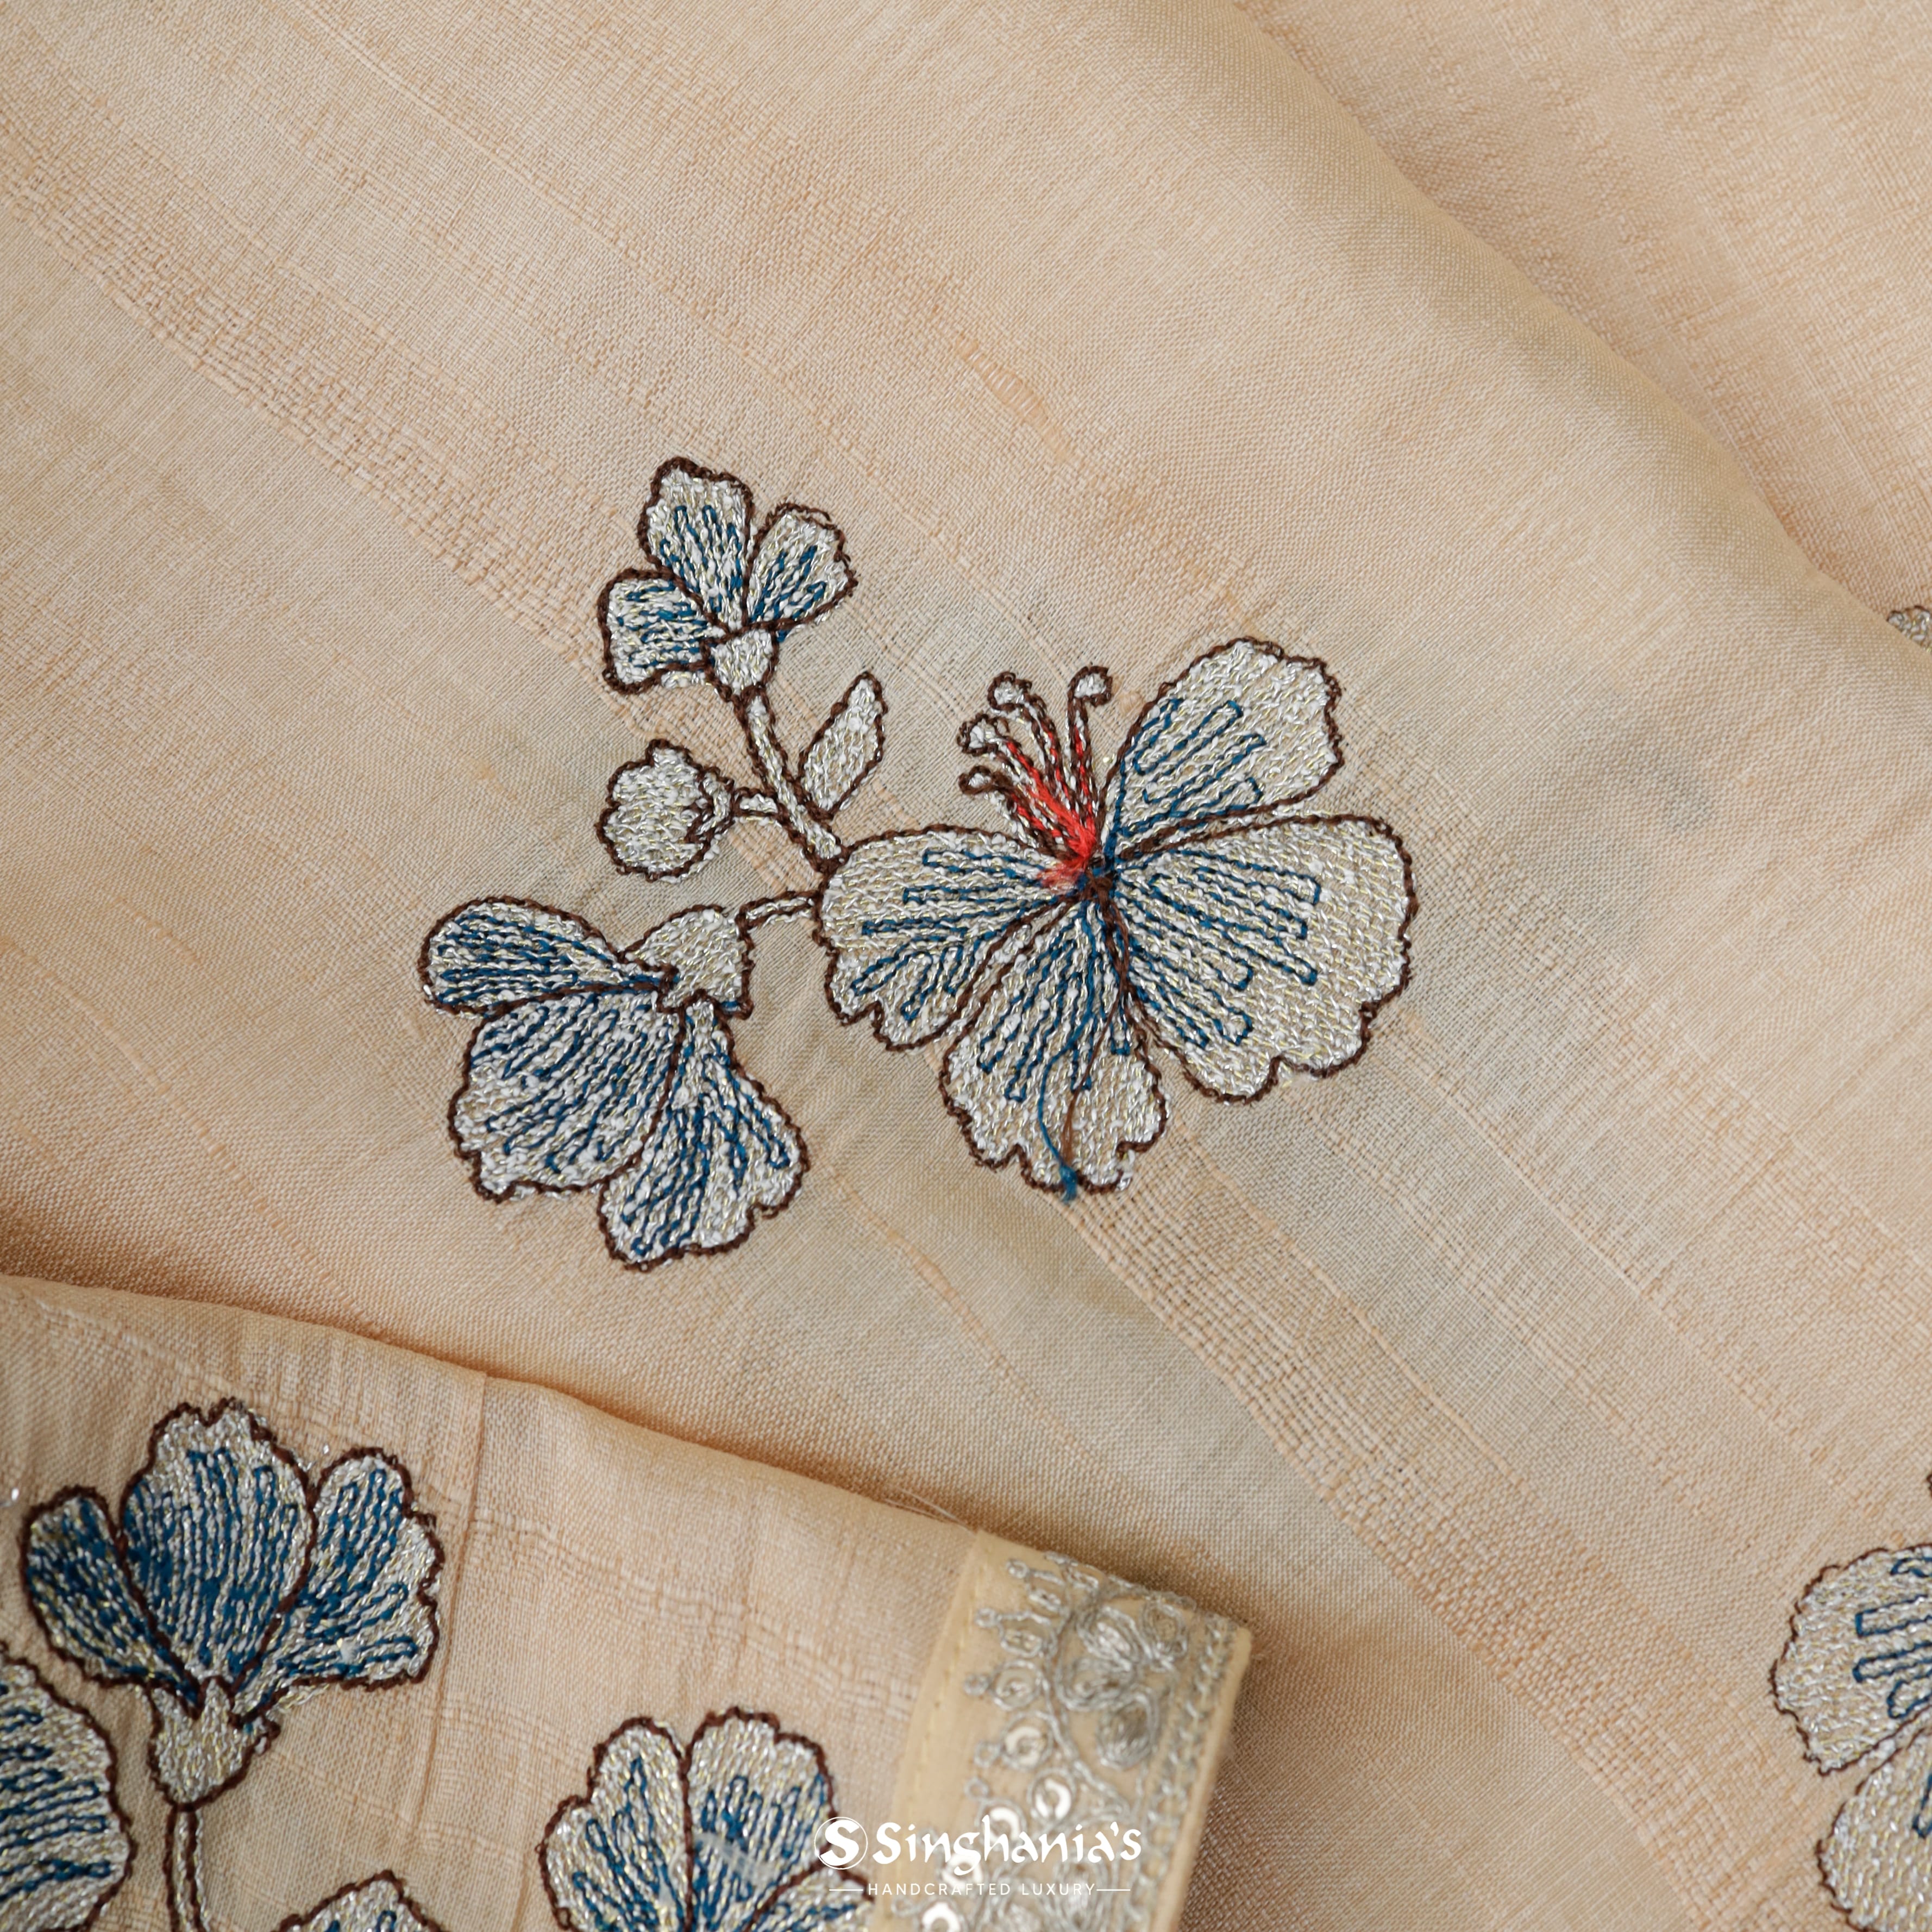 Bisque Brown Tussar Embroidery Silk Saree With Floral Embroidery Motifs